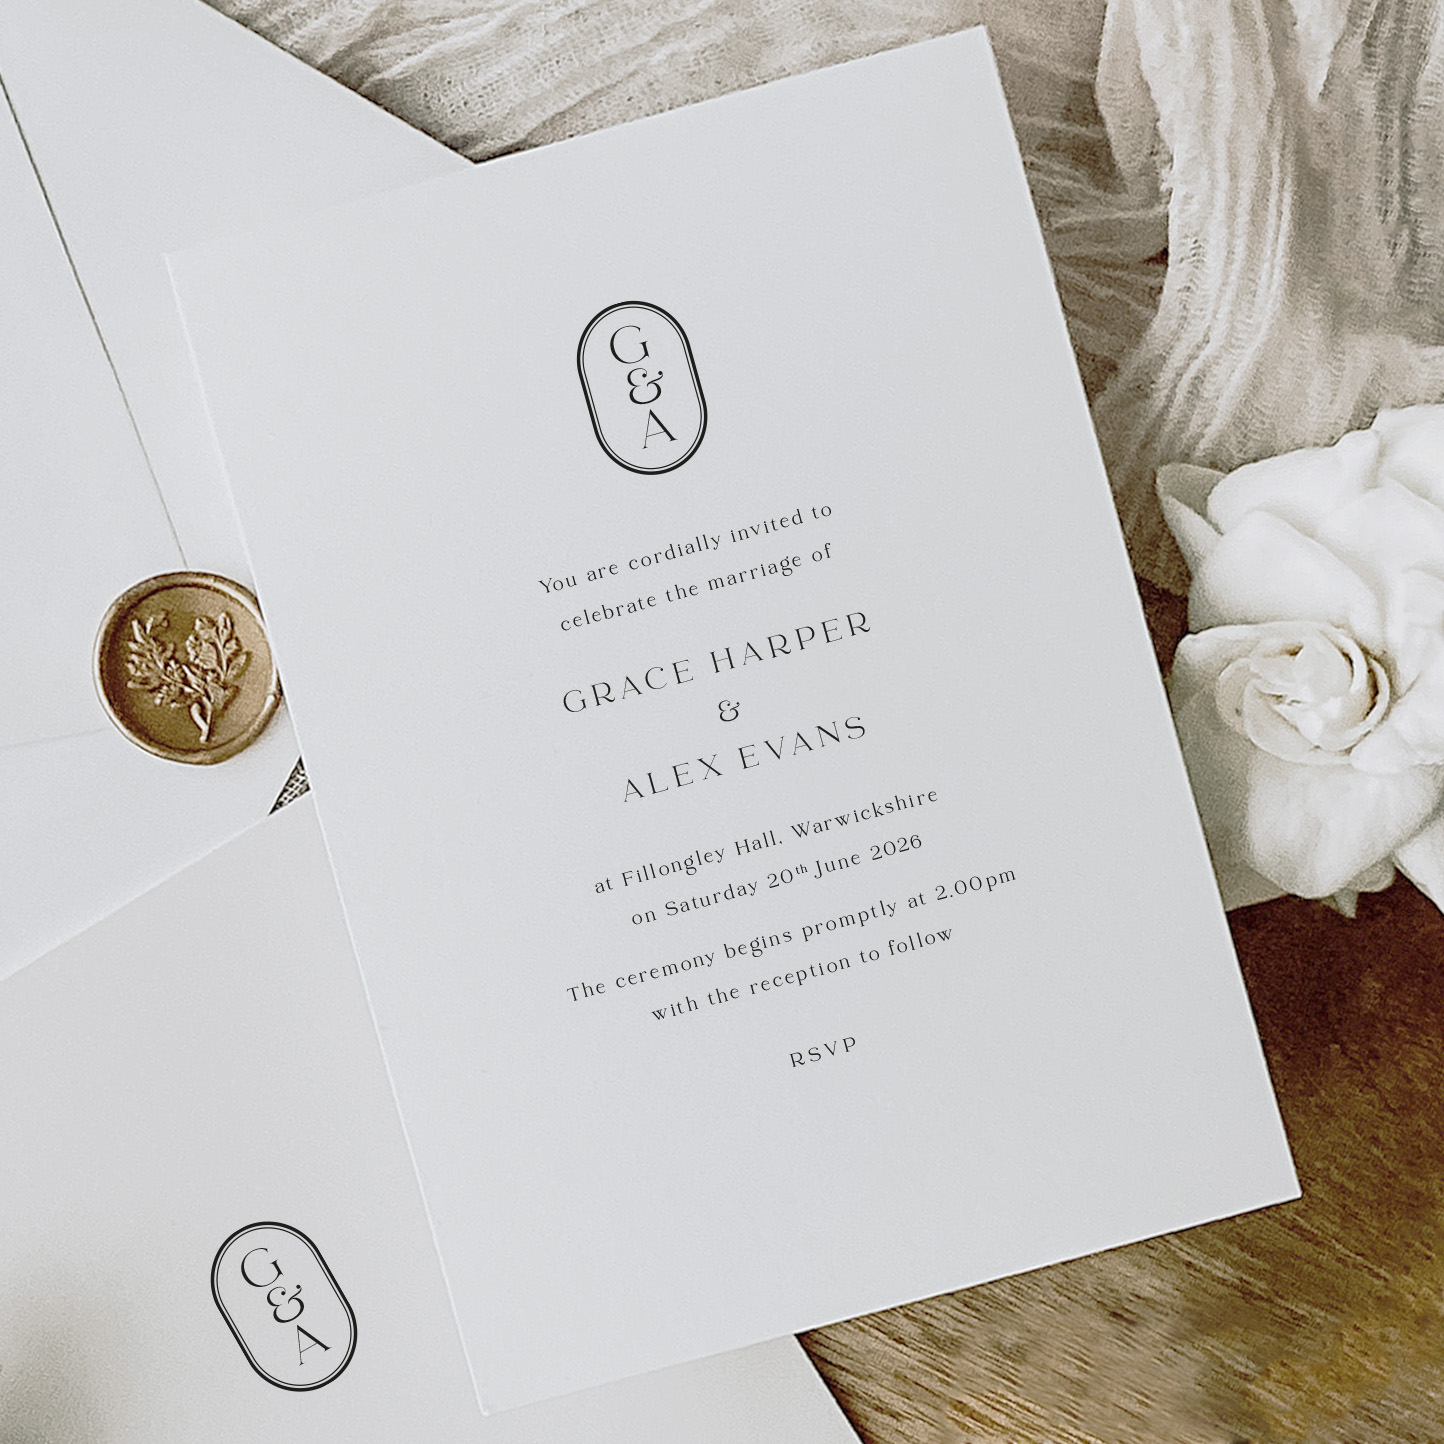 Showing Grace - simple elegant monogram wedding stationery and invitations collection